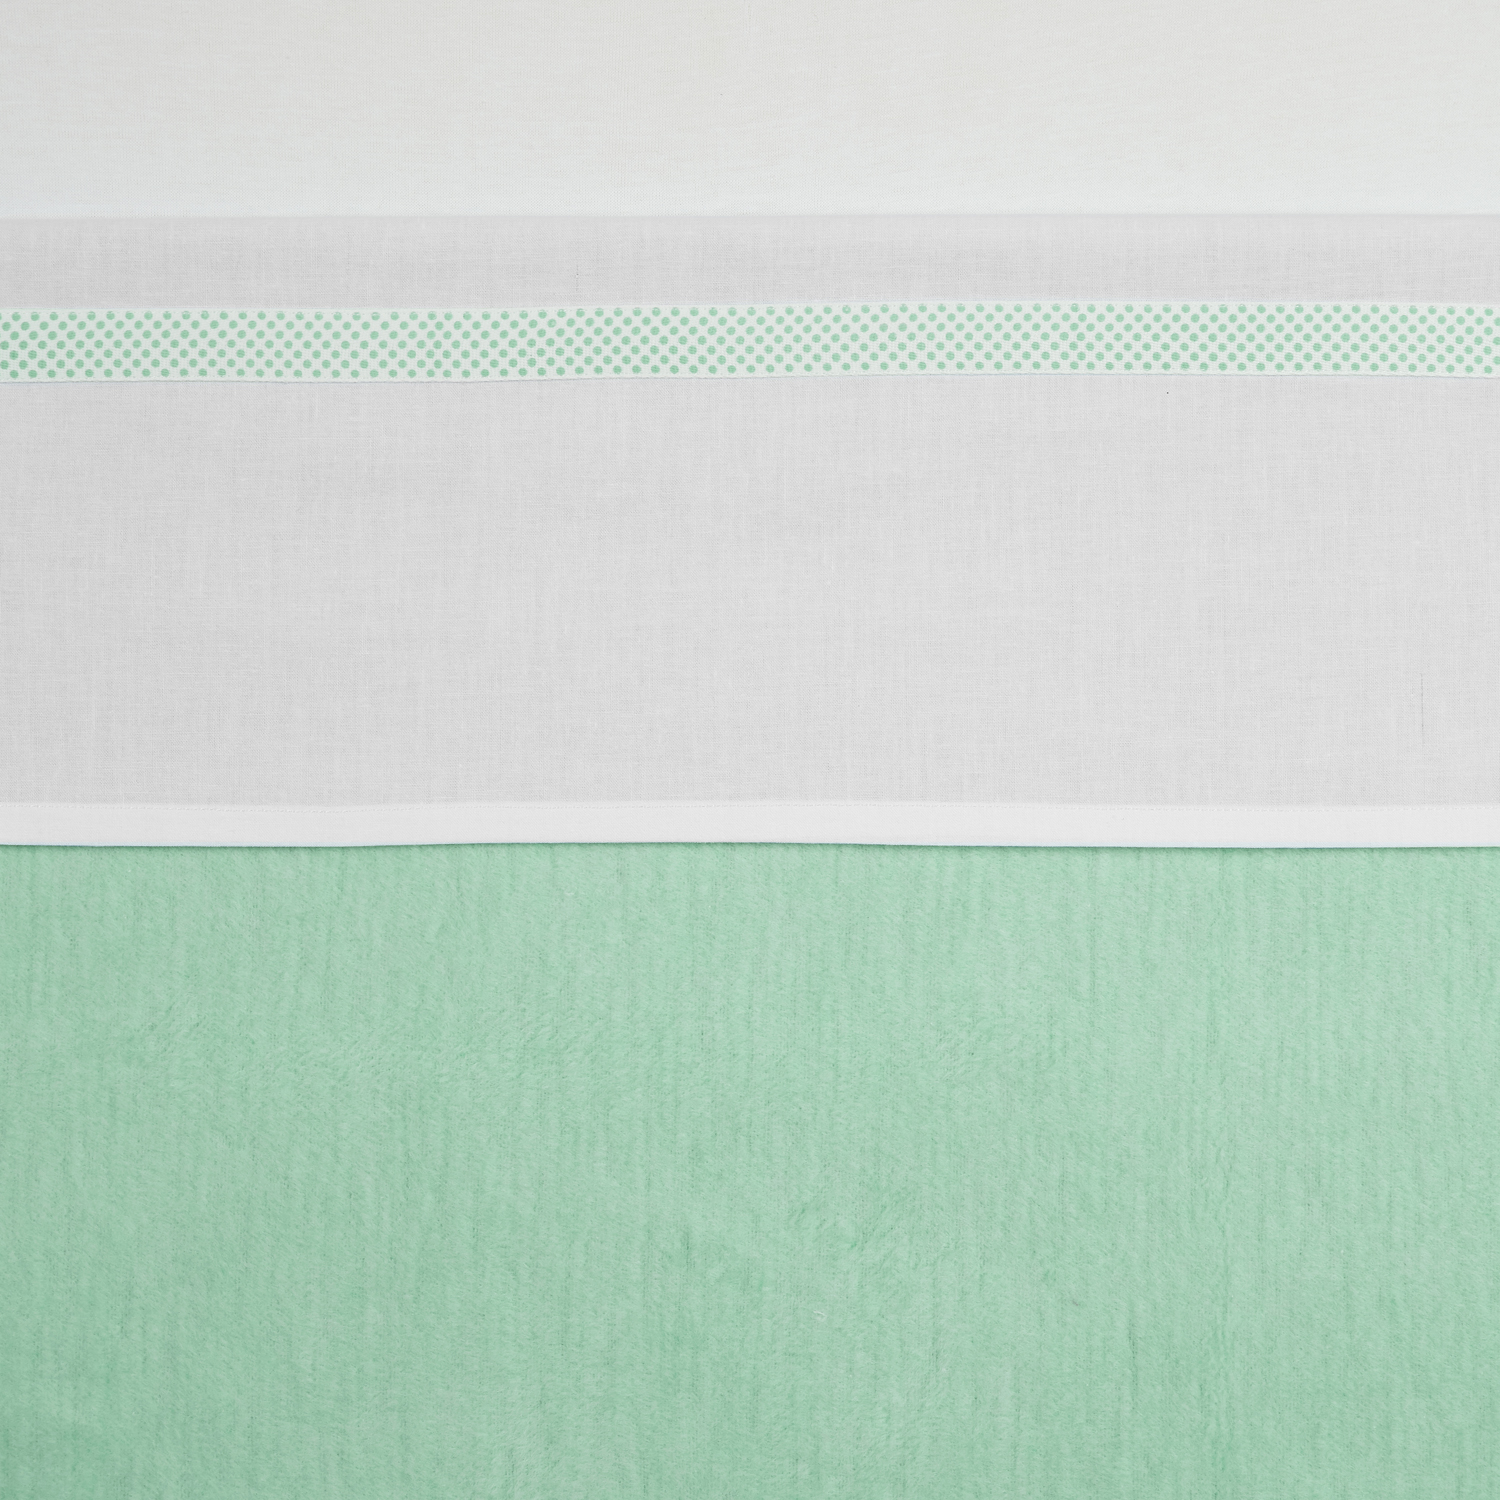 Cot Bed Sheet Piping Dot - New Mint/White - 100X150cm